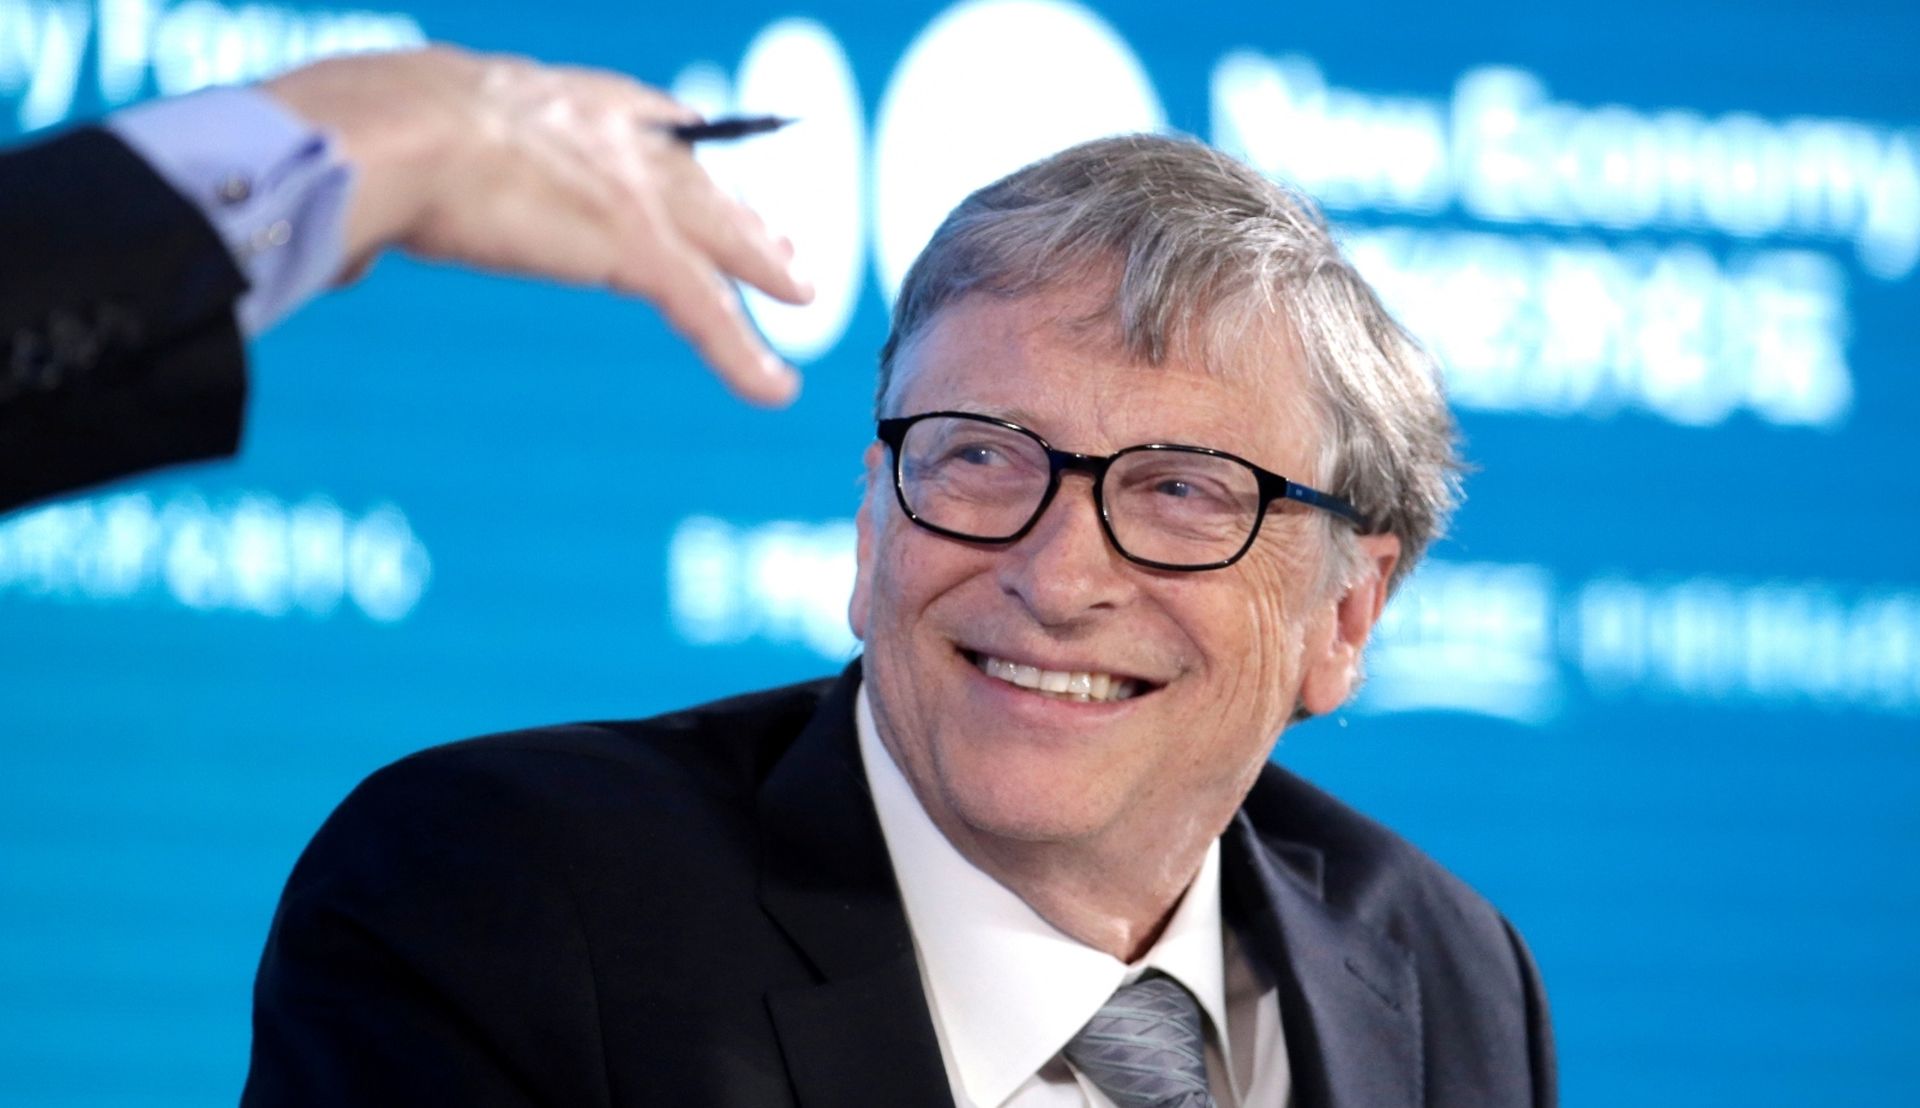 FILE PHOTO: Bill Gates, Co-Chair of Bill & Melinda Gates Foundation, attends a conversation at the 2019 New Economy Forum in Beijing FILE PHOTO: FILE PHOTO: Bill Gates, Co-Chair of Bill & Melinda Gates Foundation, attends a conversation at the 2019 New Economy Forum in Beijing, China November 21, 2019. REUTERS/Jason Lee - RC2MFD9FAT7I/File Photo Jason Lee